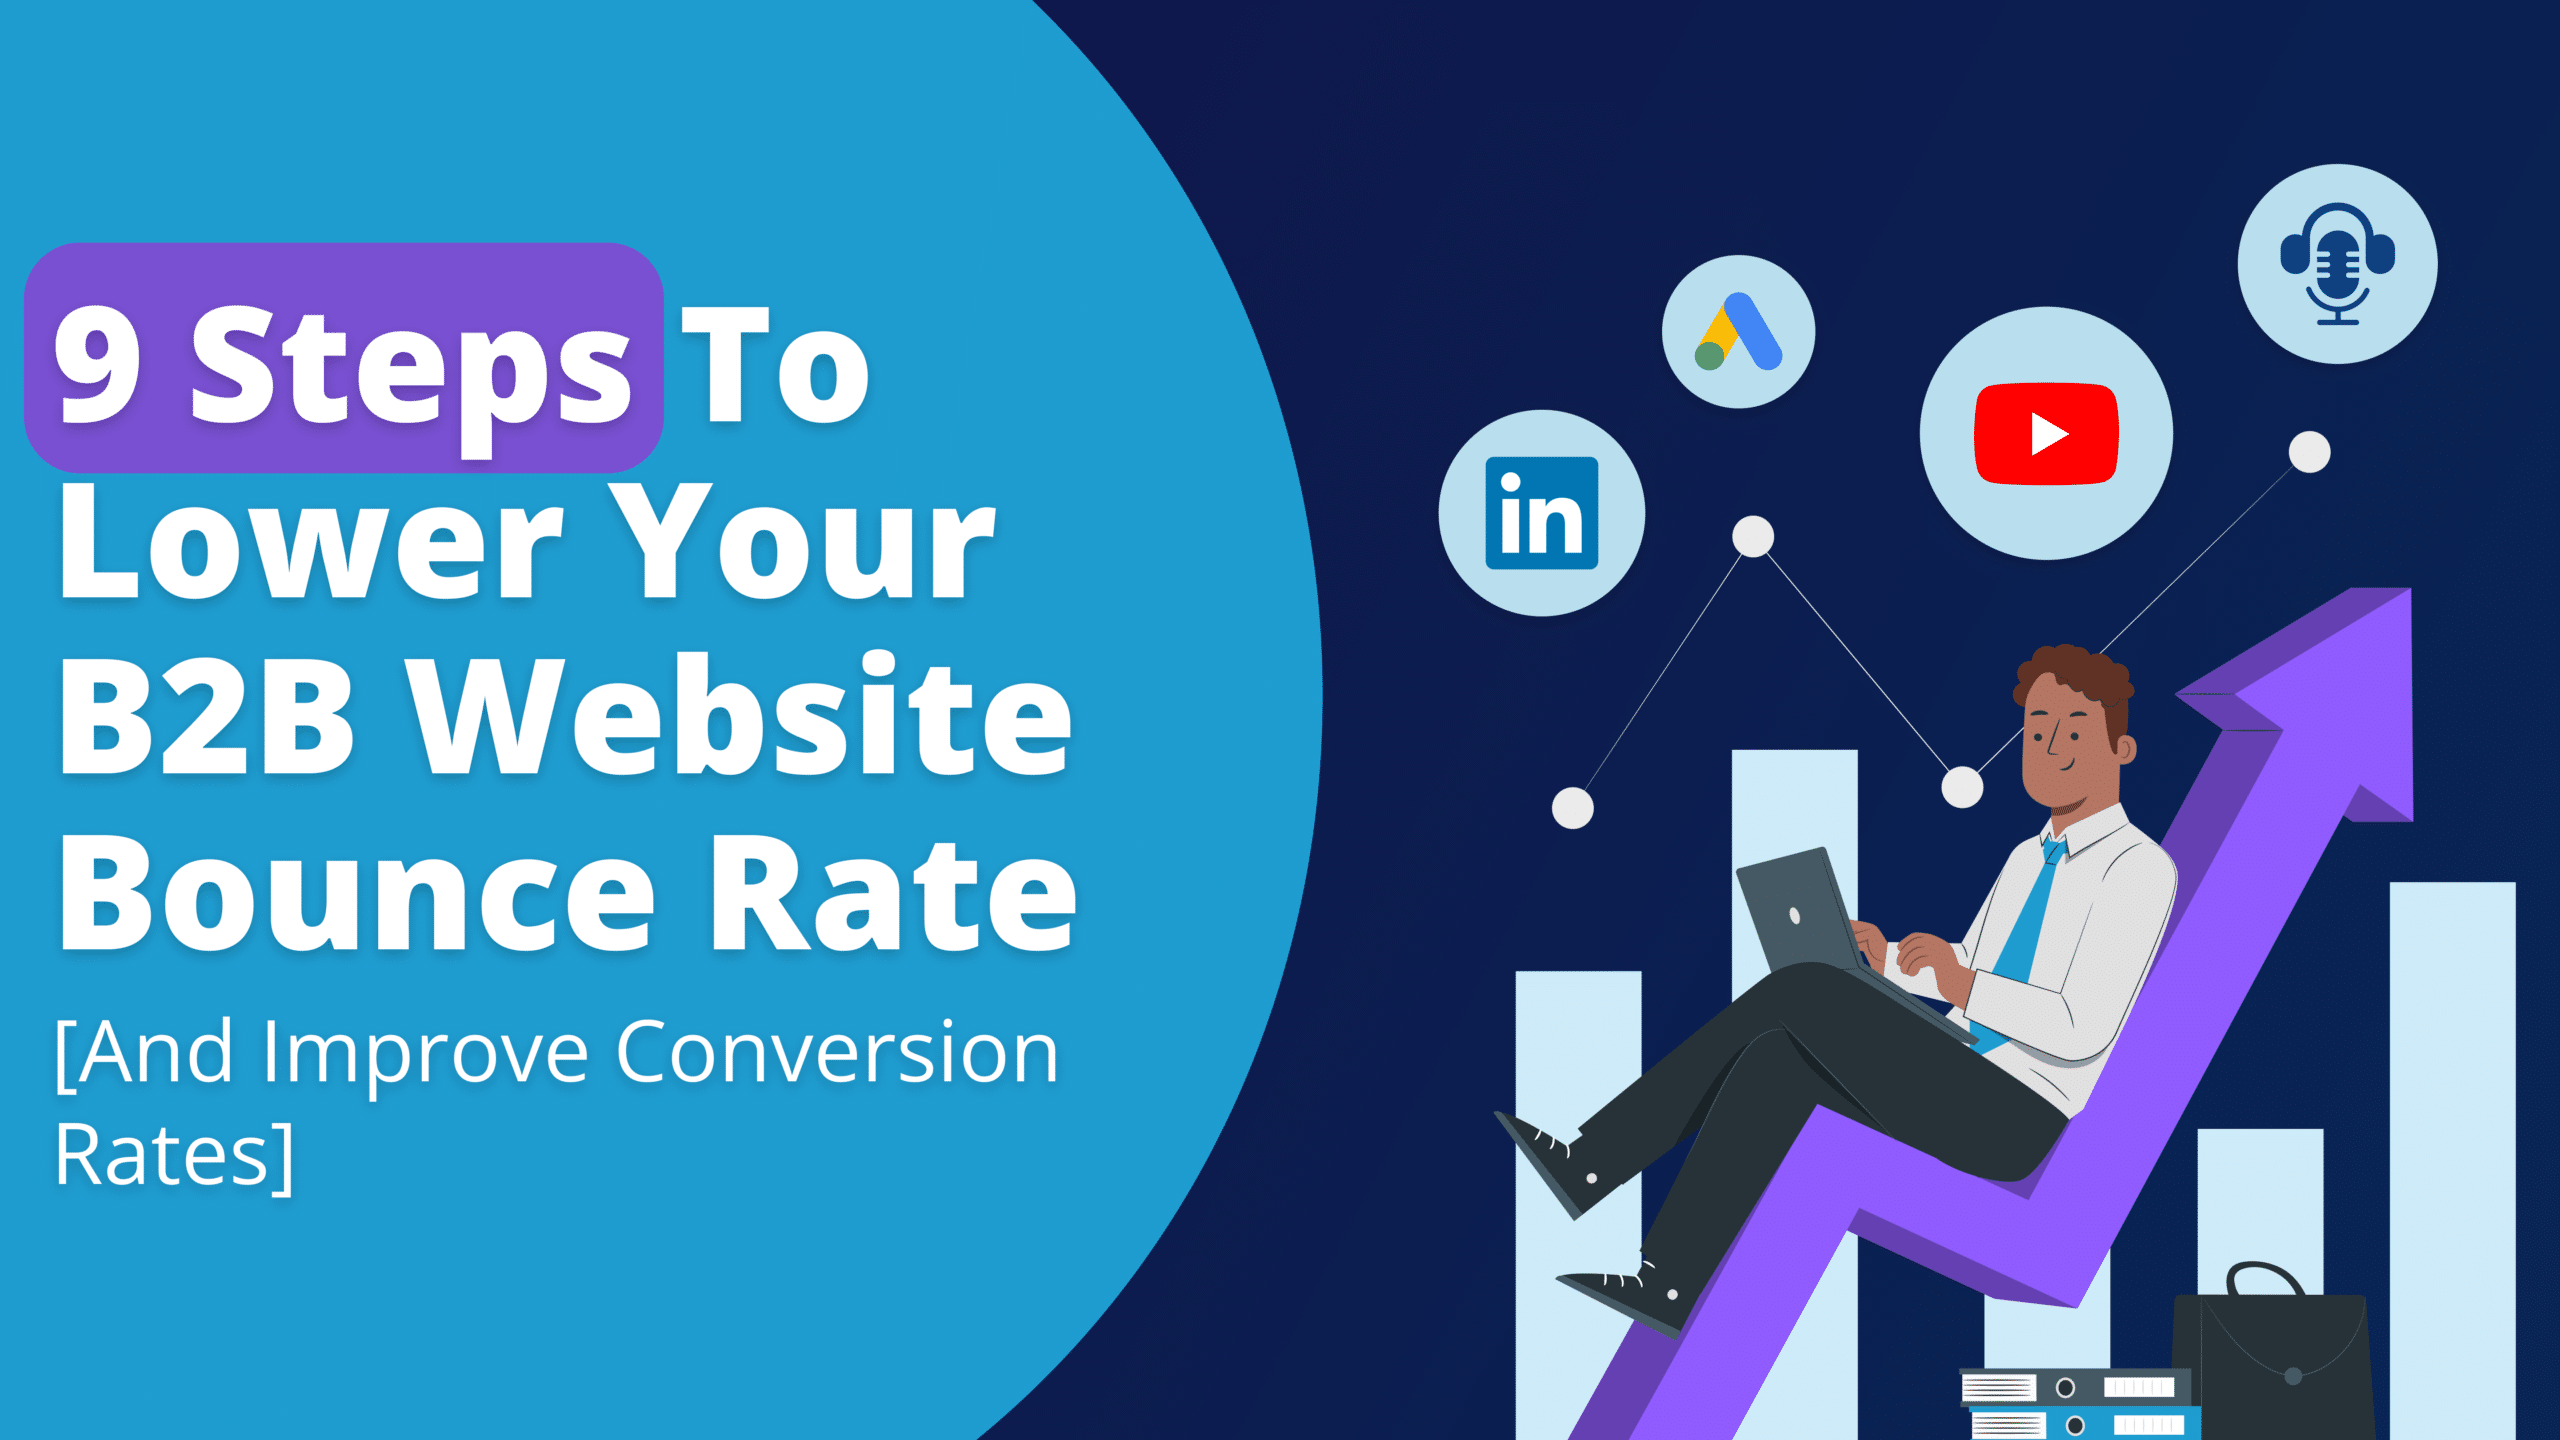 9 Steps To Lower Your B2B Website Bounce Rate